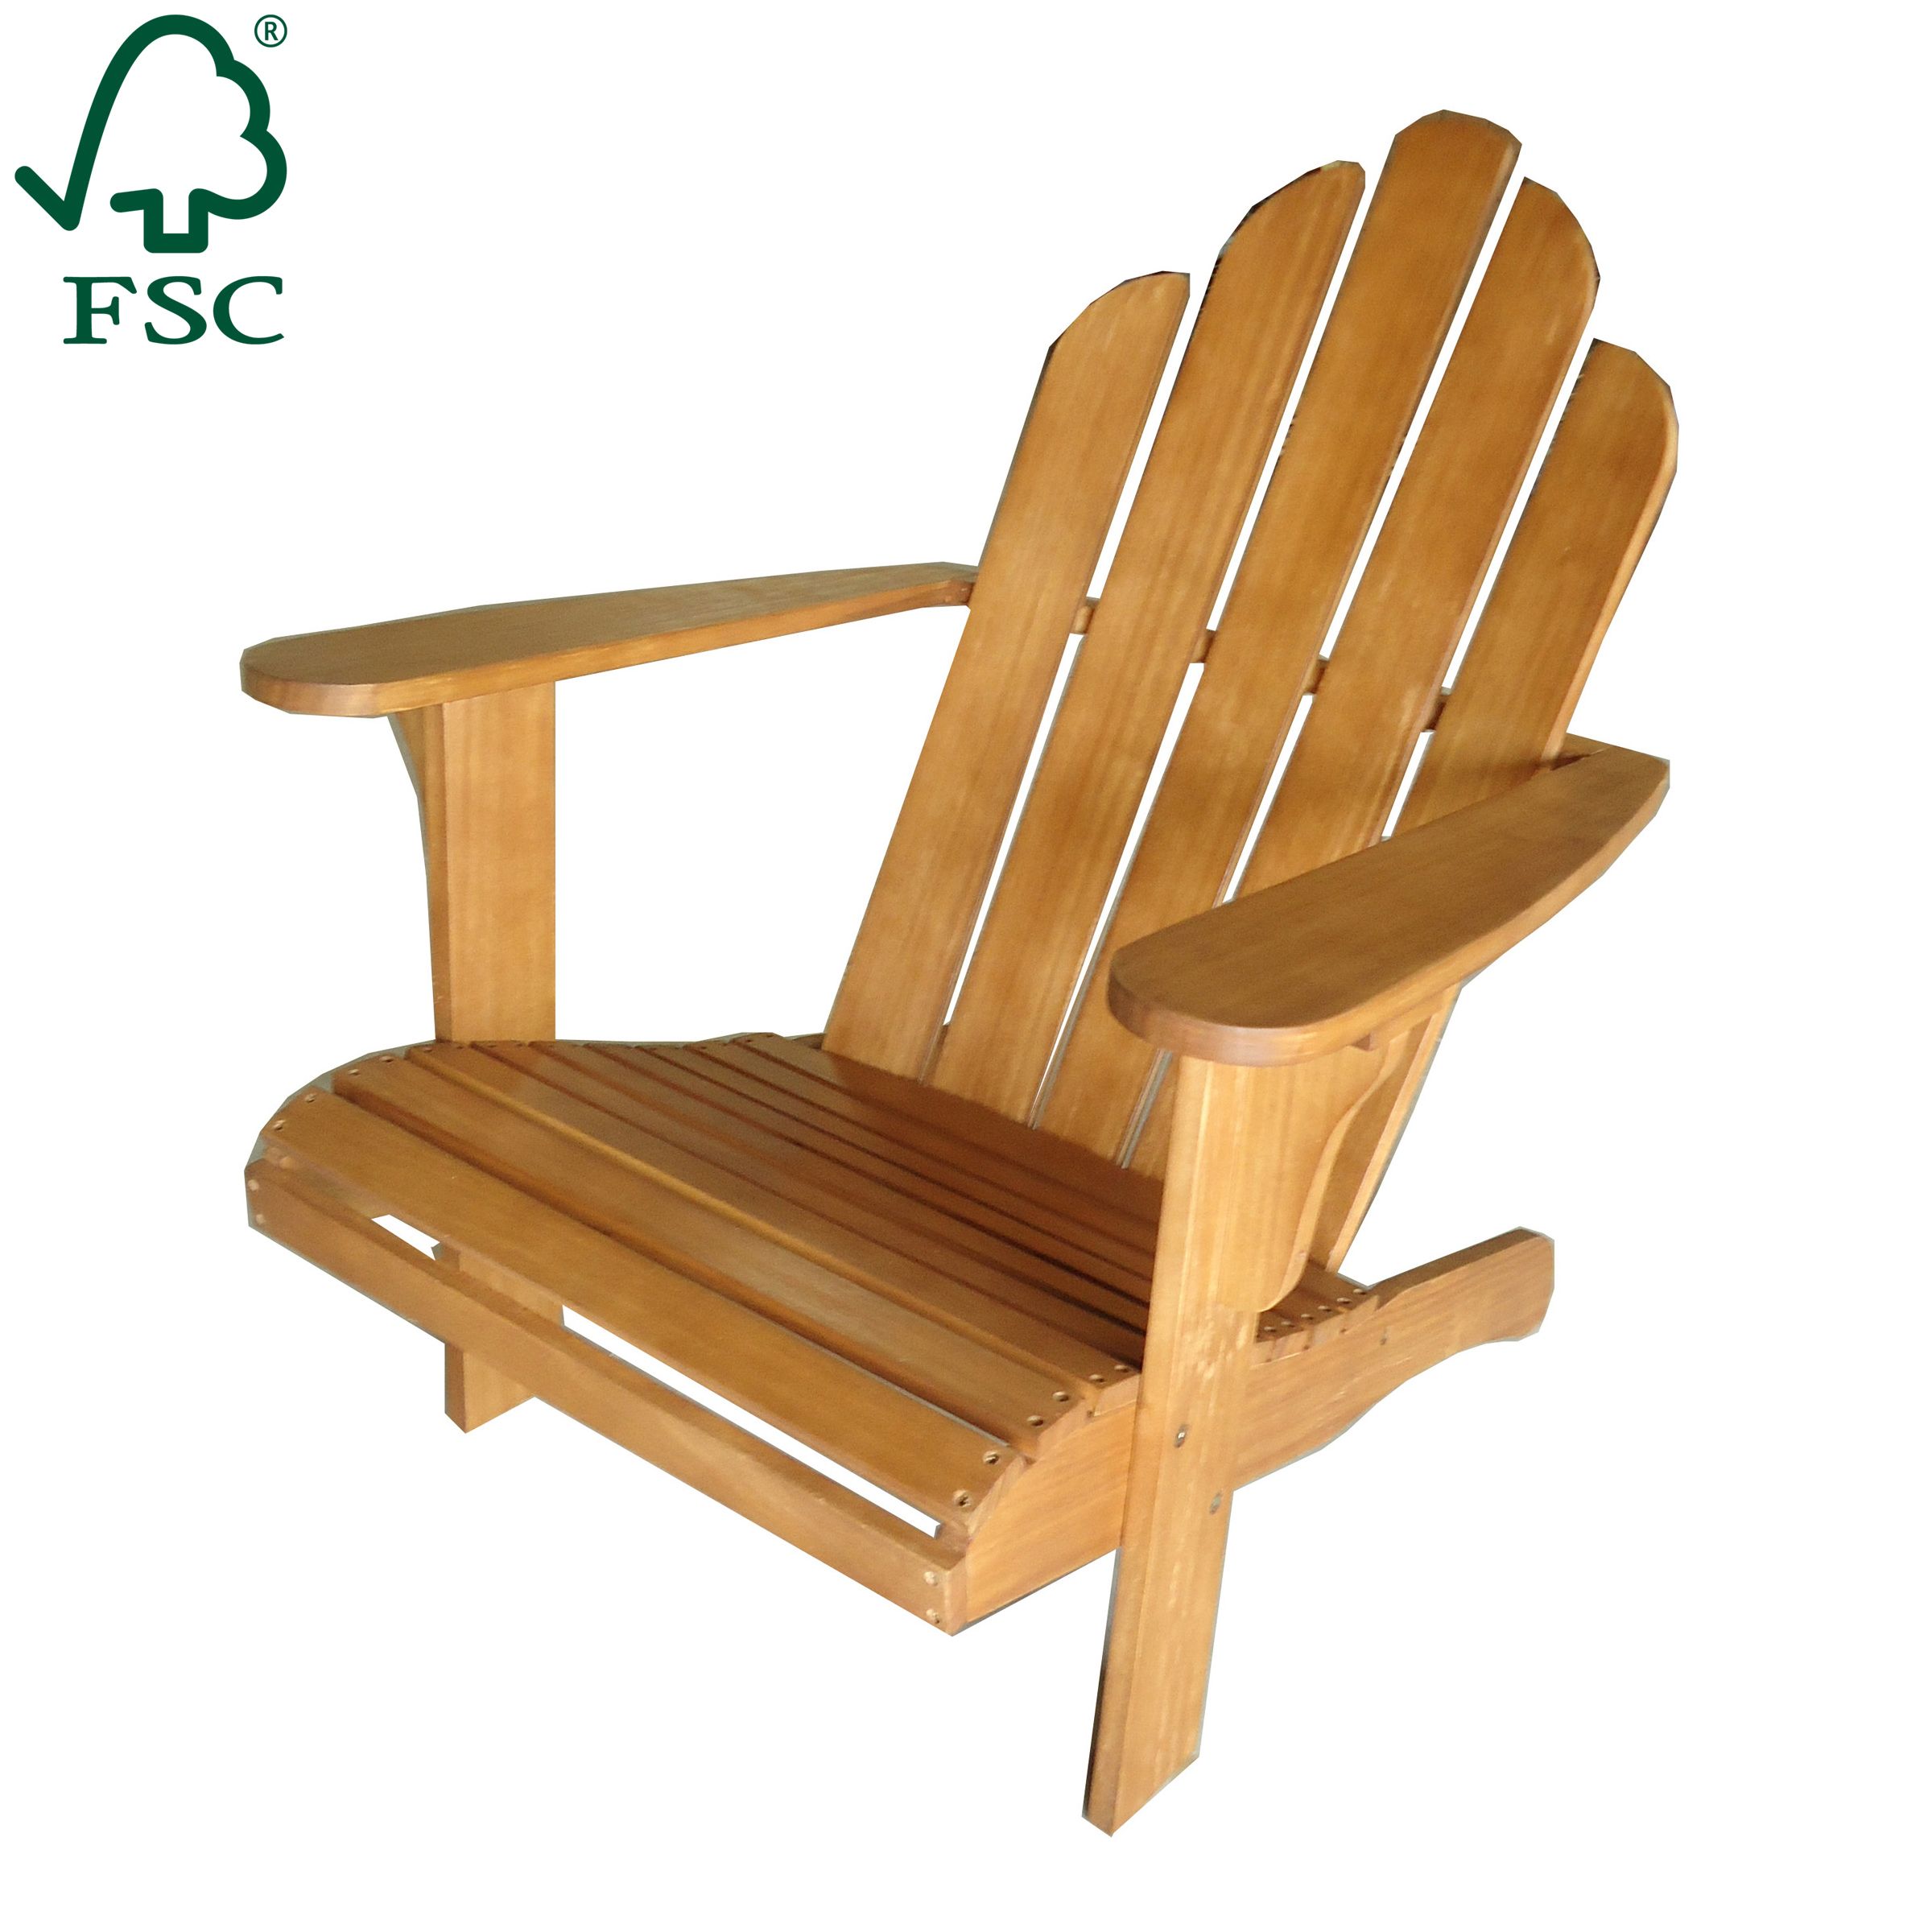 mimosa cape cod adirondack timber chair bunnings outdoor side table inch end west elm mirror target threshold furniture windham home ideas phone stand for desk stands porcelain